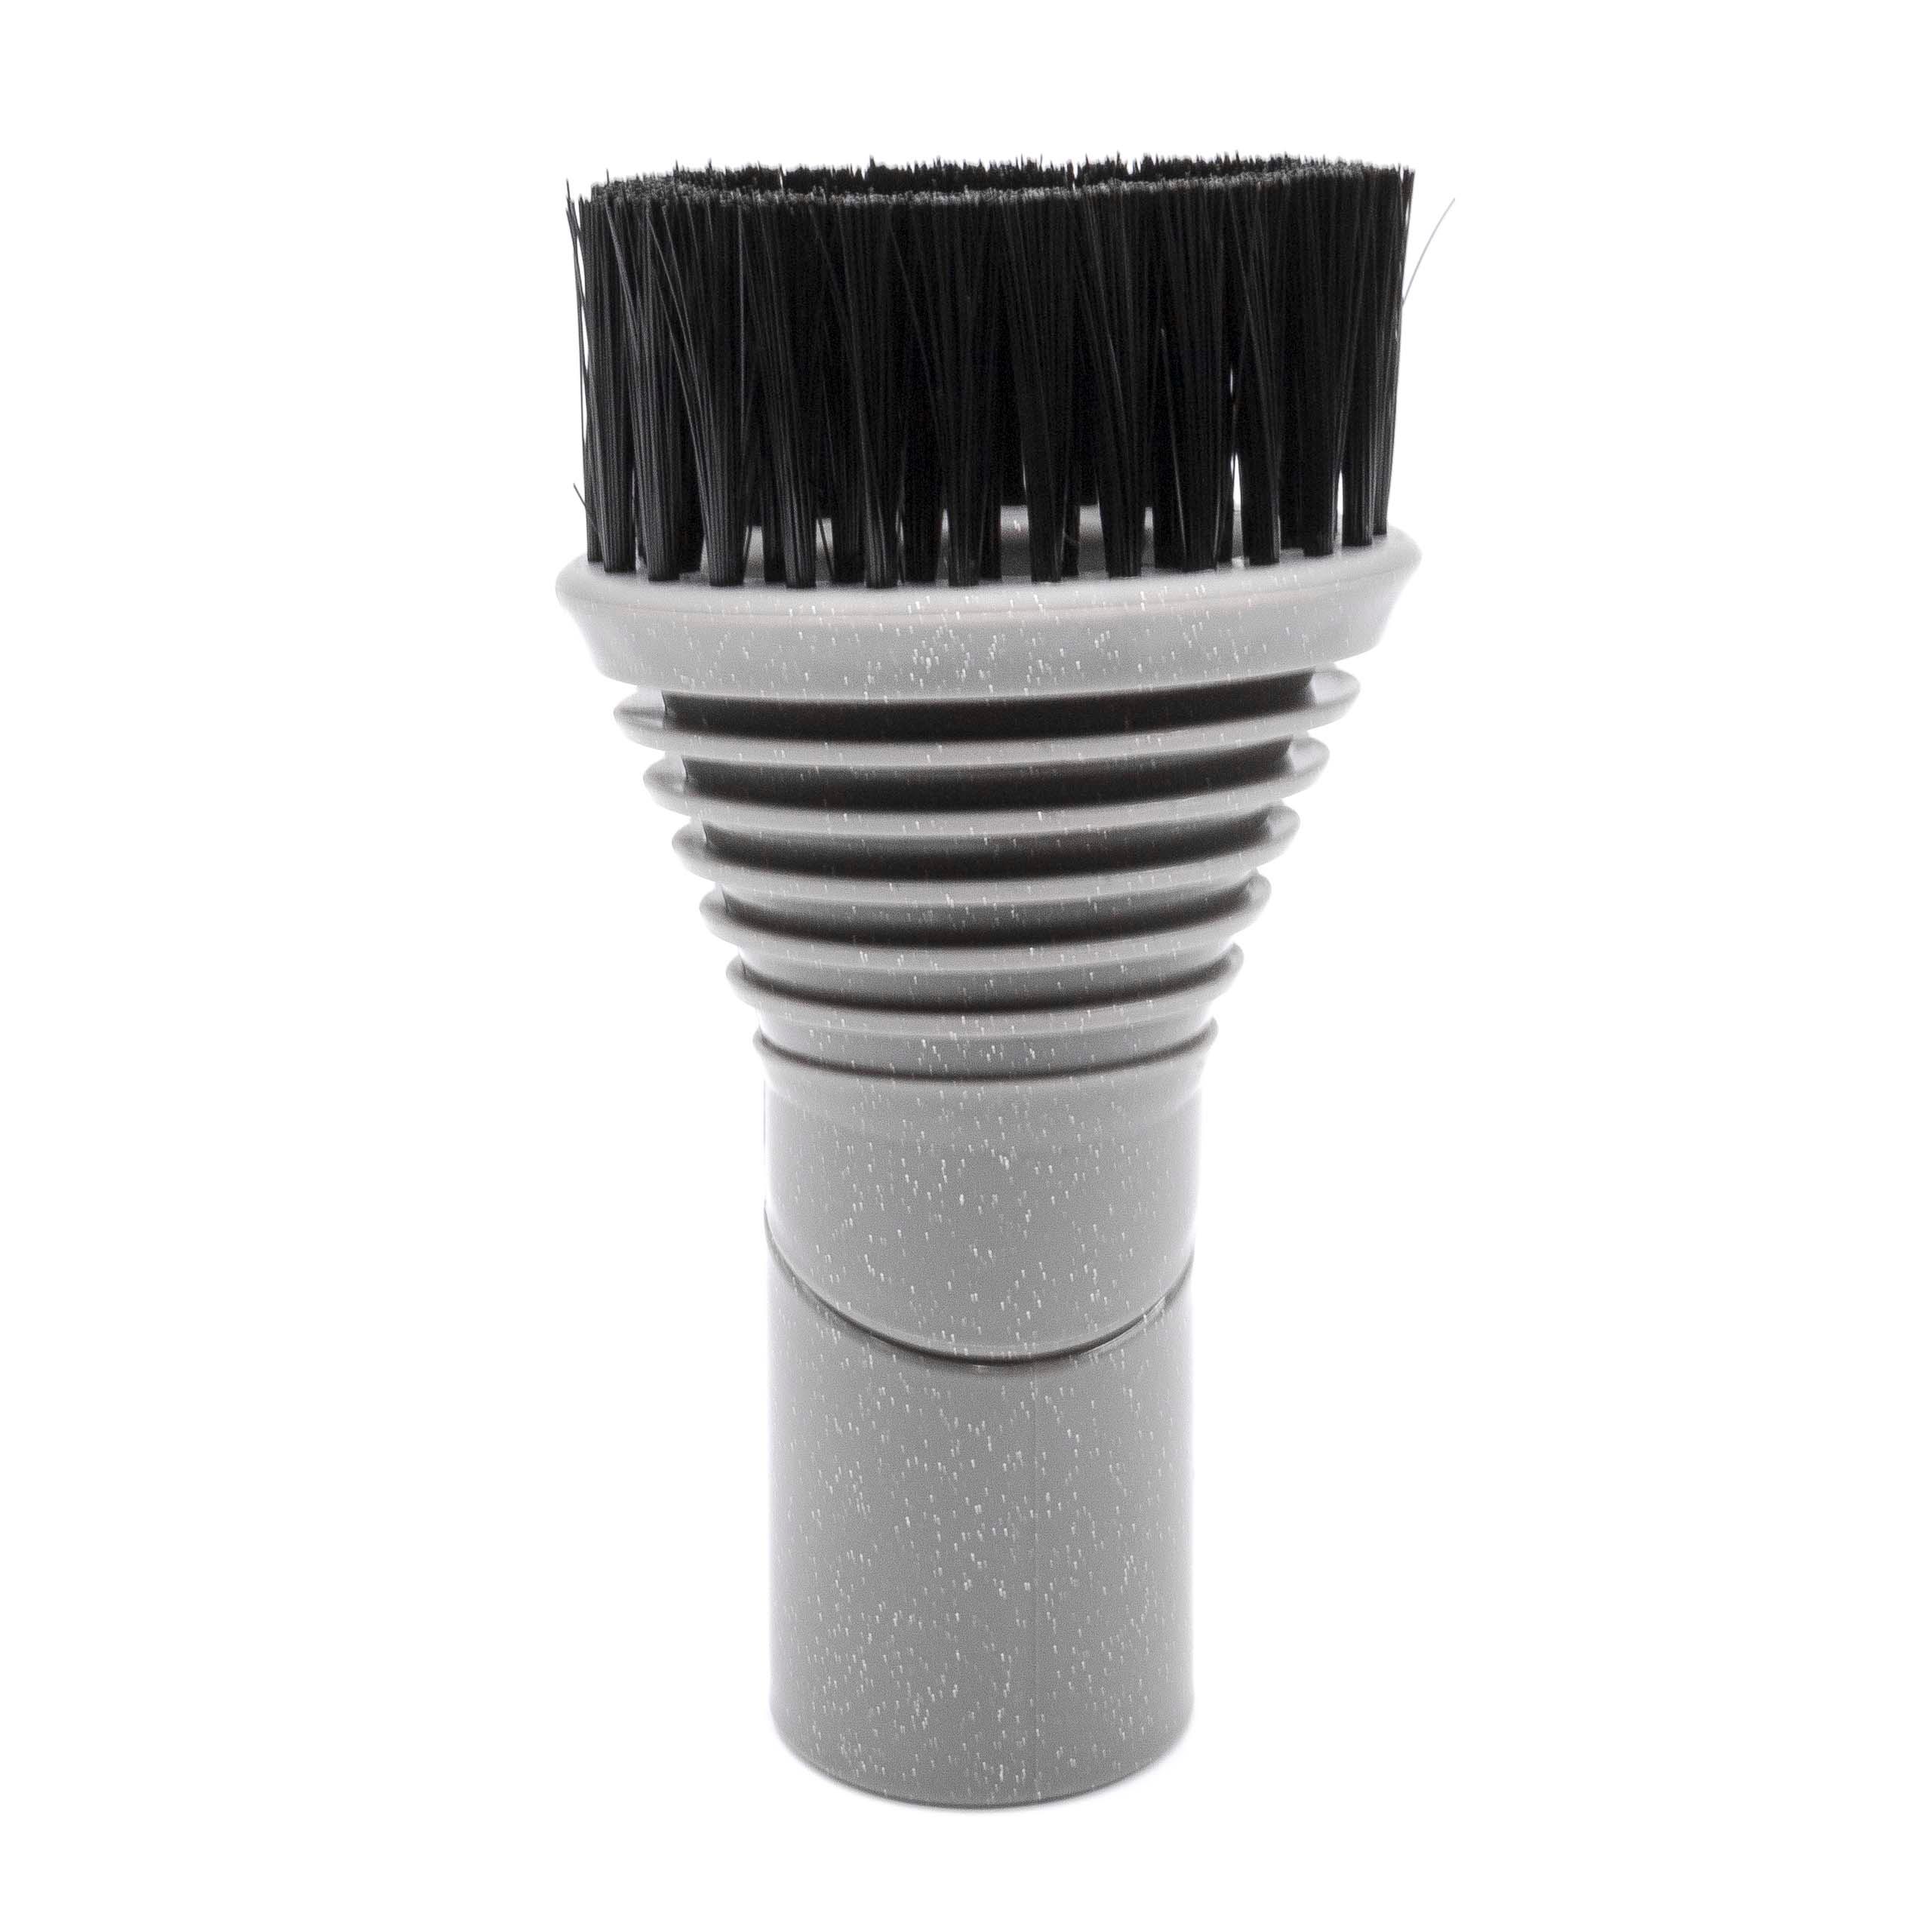  Brush Nozzle 32 mm Connector for Dyson DC05 Absolute Vacuum Cleaner etc. - Furniture Brush with Bri